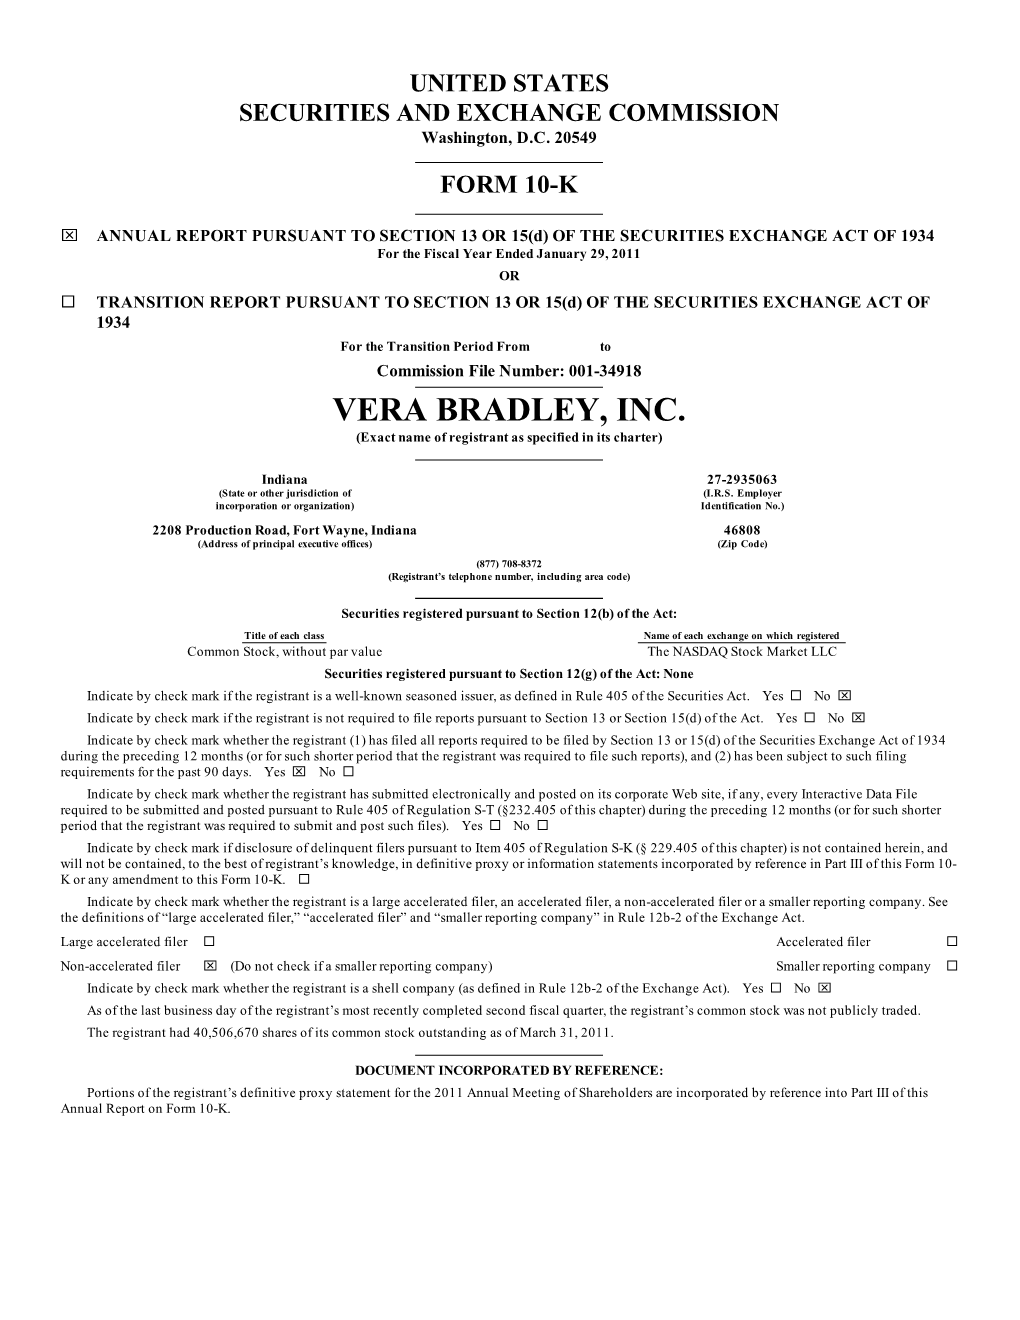 VERA BRADLEY, INC. (Exact Name of Registrant As Specified in Its Charter)